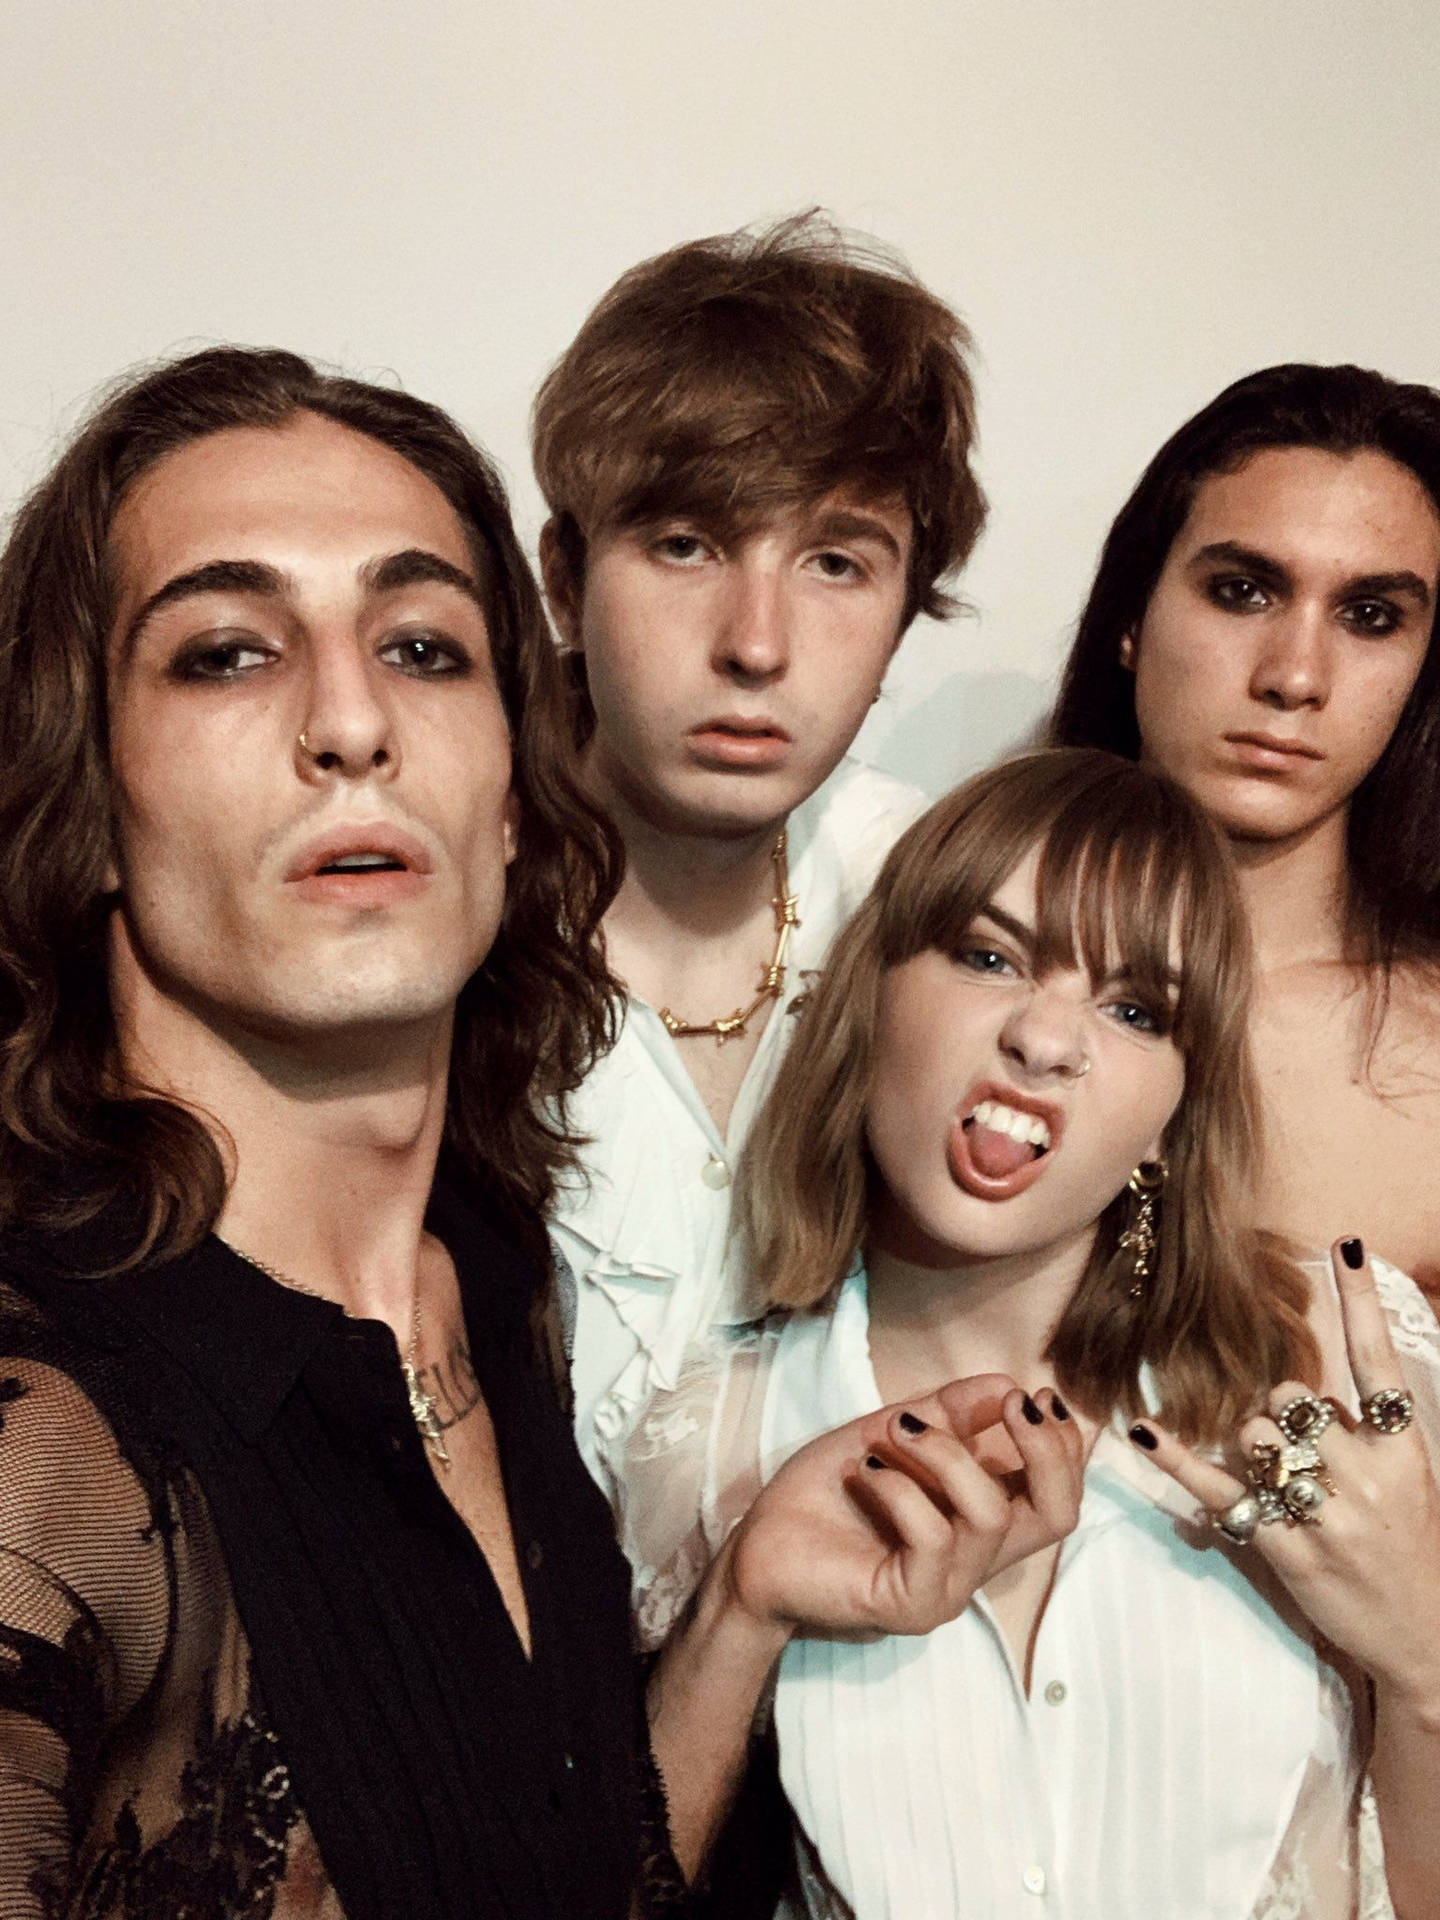 Maneskin Different Facial Expressions Wallpaper